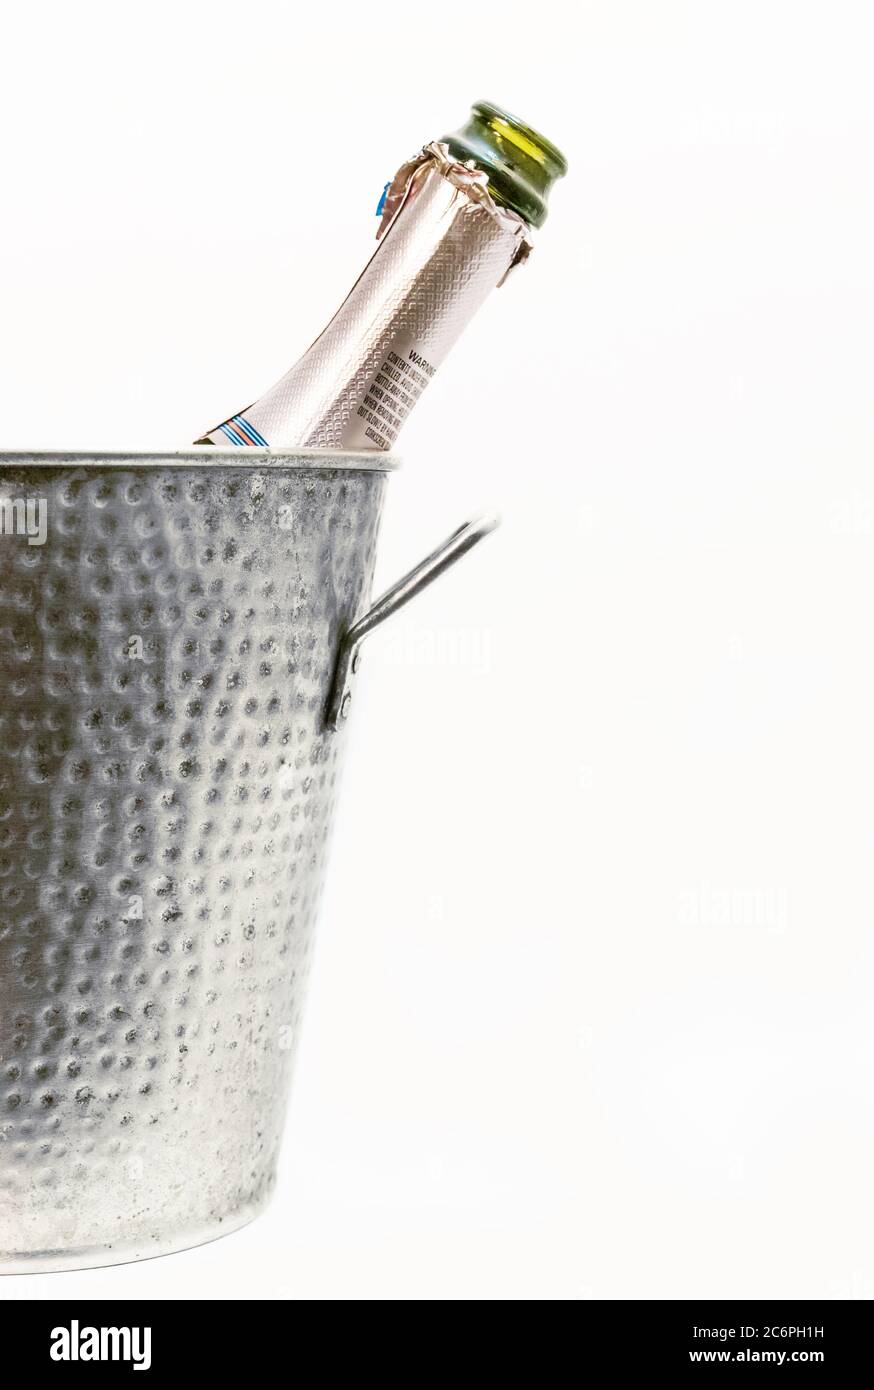 A champaign bottle or sparkling wine in the tin cooler. Stock Photo